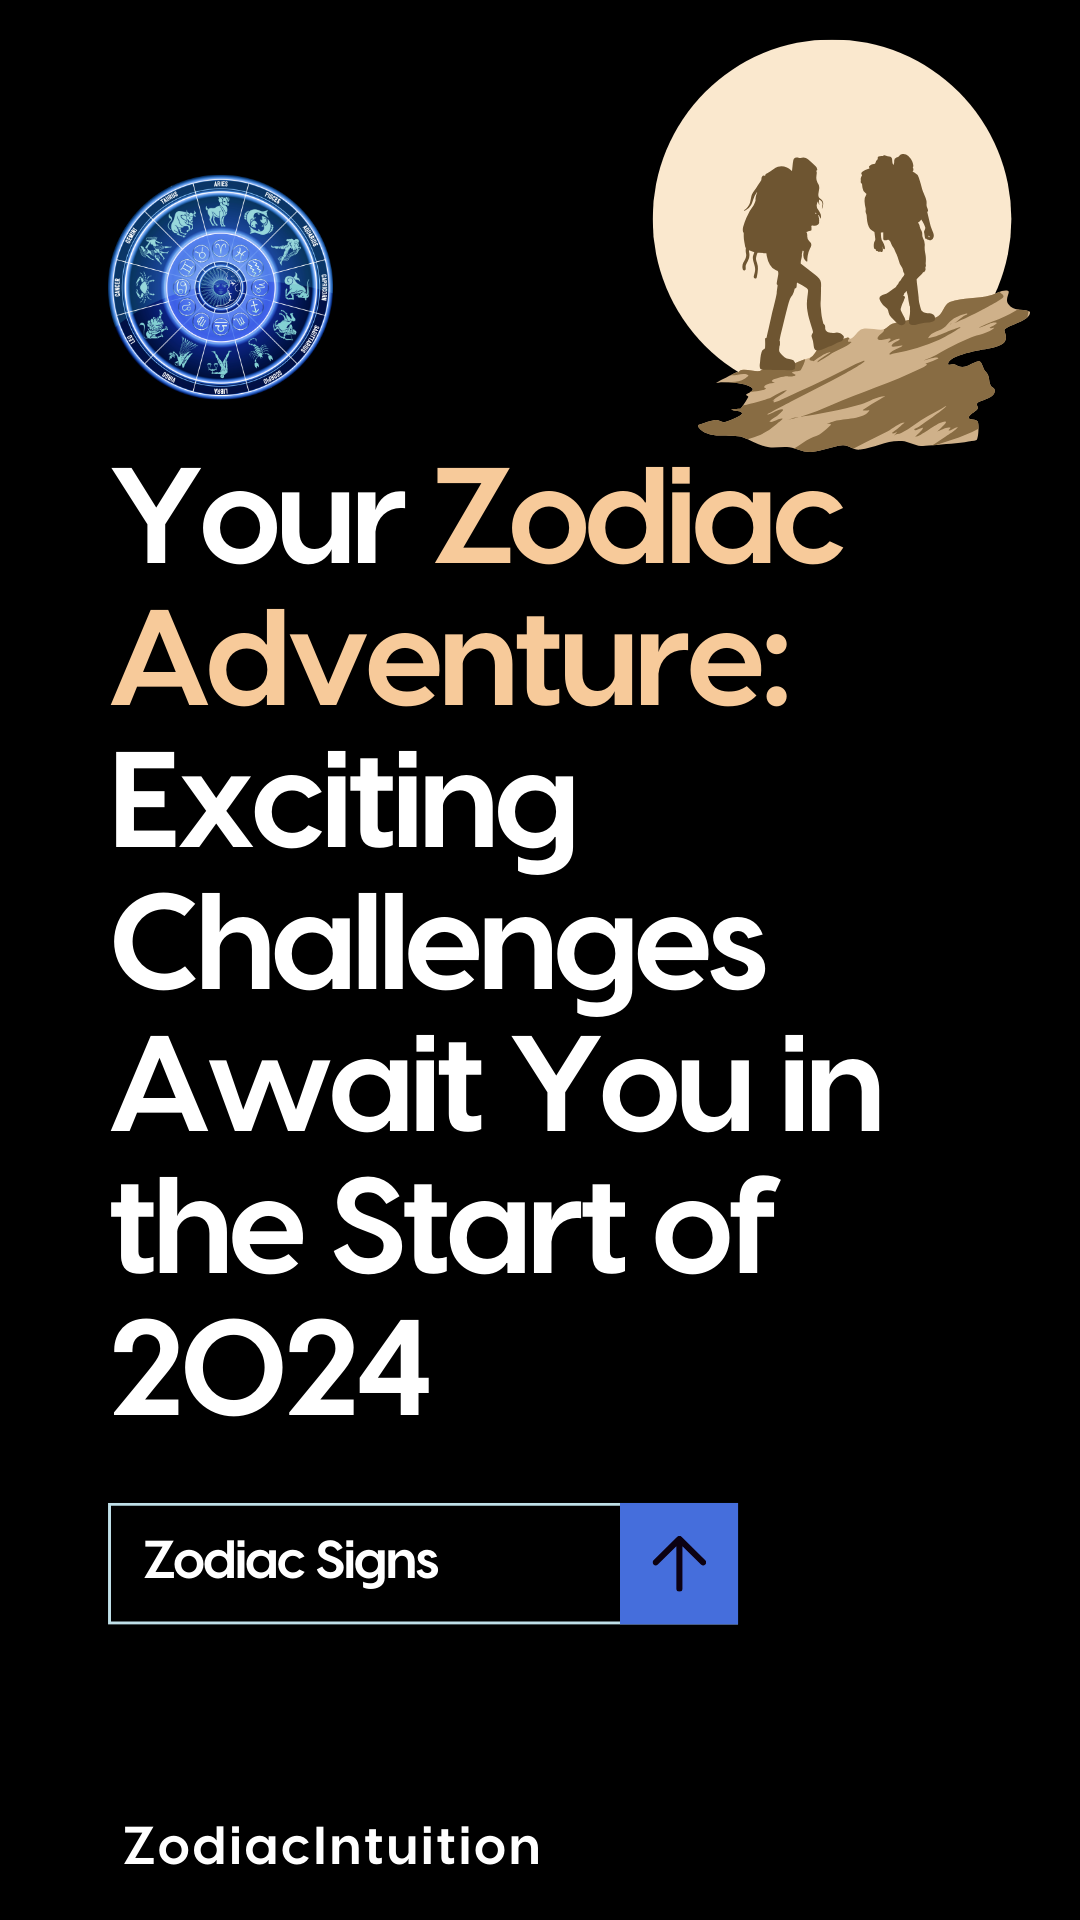 Your Zodiac Adventure: Exciting Challenges Await You in the Start of 2024